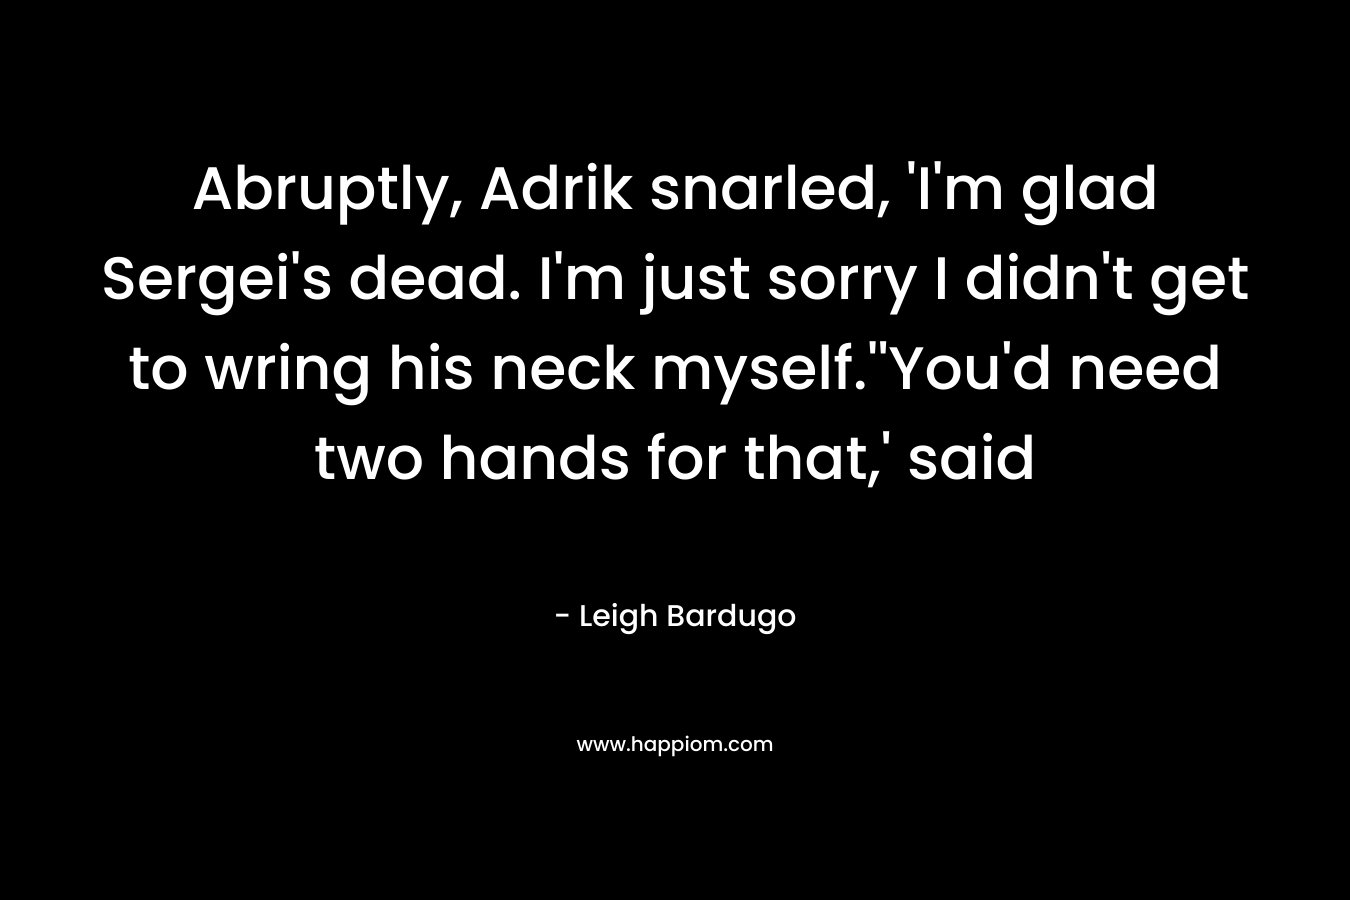 Abruptly, Adrik snarled, ‘I’m glad Sergei’s dead. I’m just sorry I didn’t get to wring his neck myself.”You’d need two hands for that,’ said – Leigh Bardugo